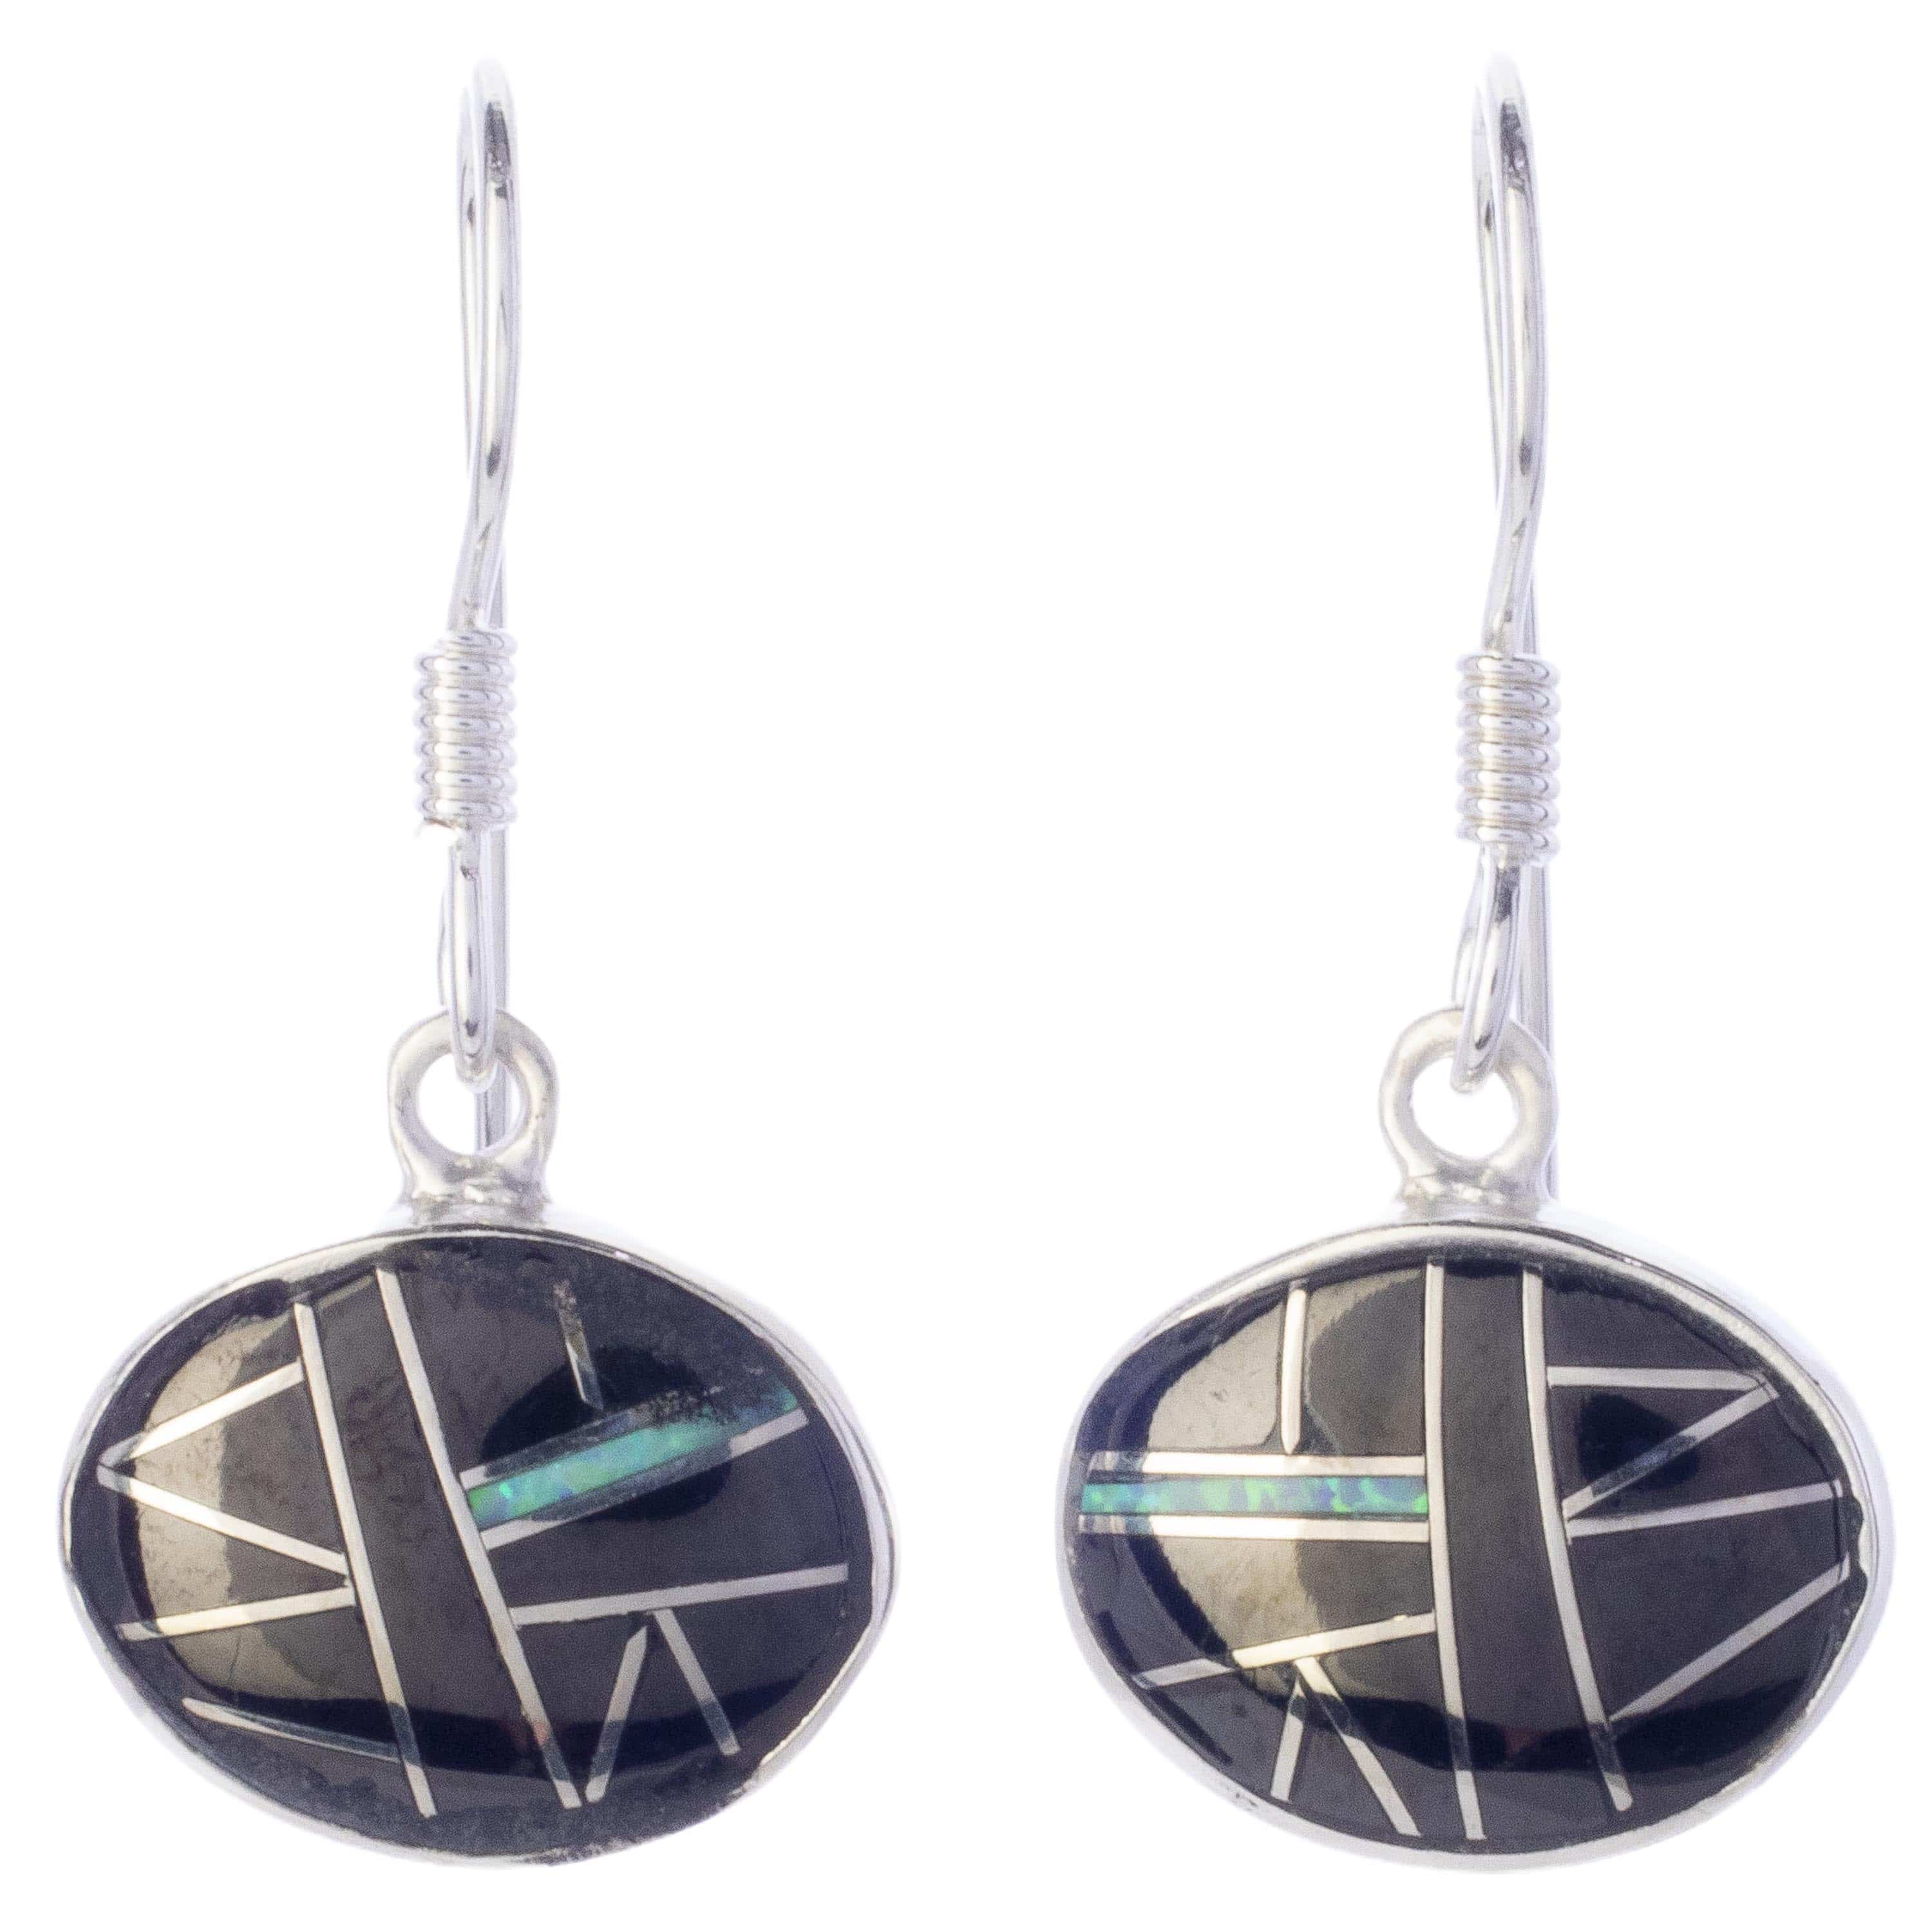 KALIFANO Southwest Silver Jewelry Black Onyx Oval Dangle Sterling Silver Earrings with French Hook USA Handmade with Opal Accent NME.2015.BO